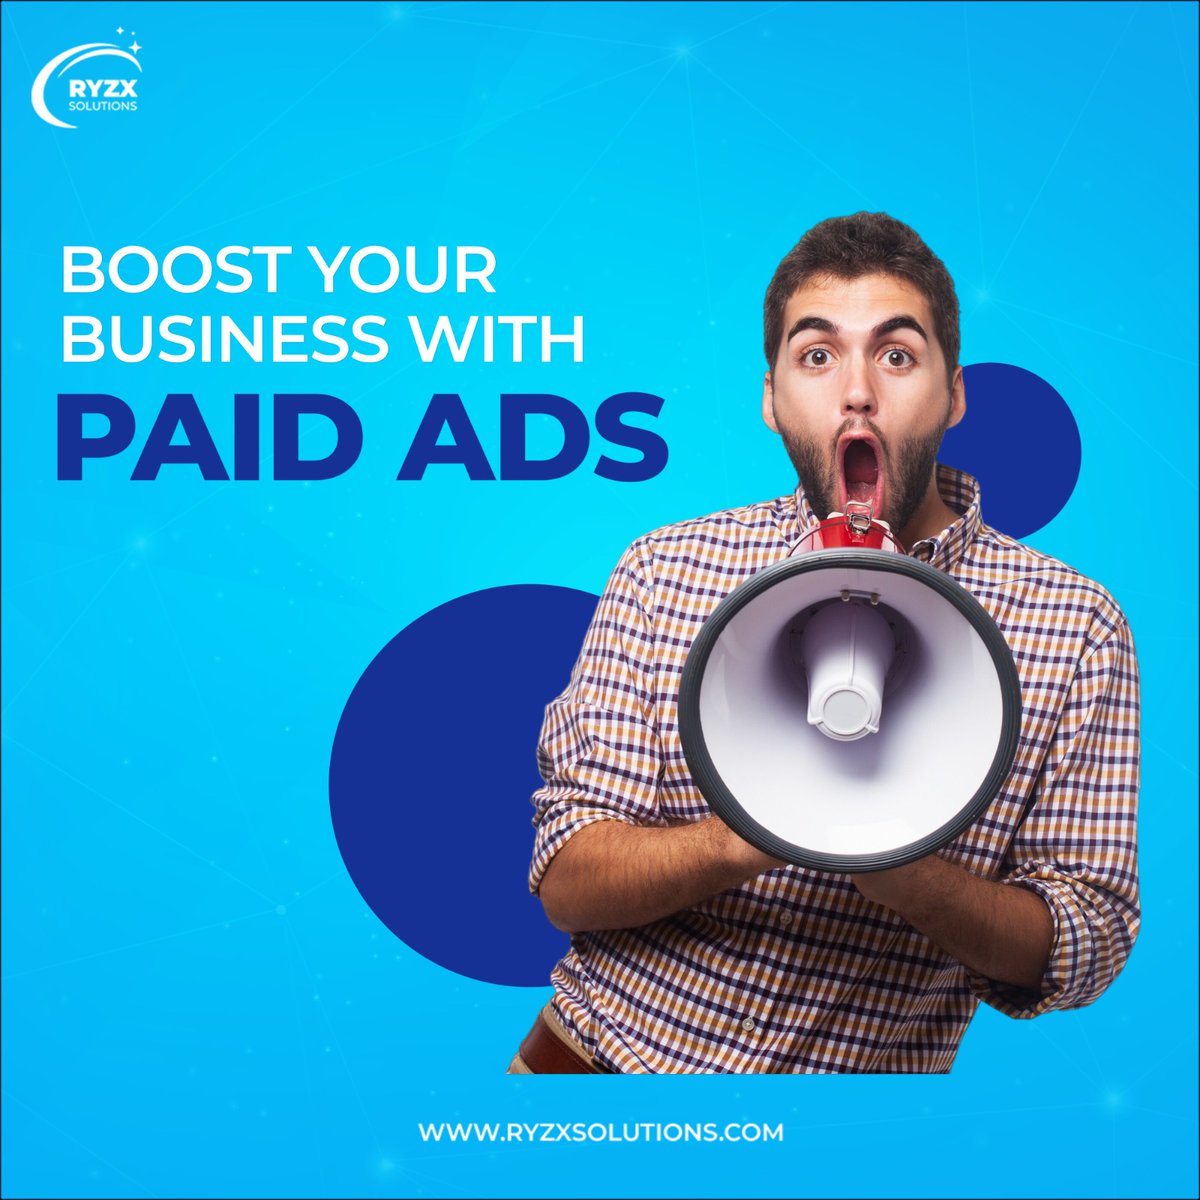 🔍 Boost Your Business With Paid Ads! 📈

#RYZXSolutions #BoostYourBusiness #PaidAds #DigitalMarketingSuccess #PPC #Marketingagency #DigitalMarketing #RYZXSuccess #BusinessBoost #MarketingStrategy #AdCampaigns #ROI #TargetedAds #GrowYourBusiness #OnlineAdvertising #MarketingTips